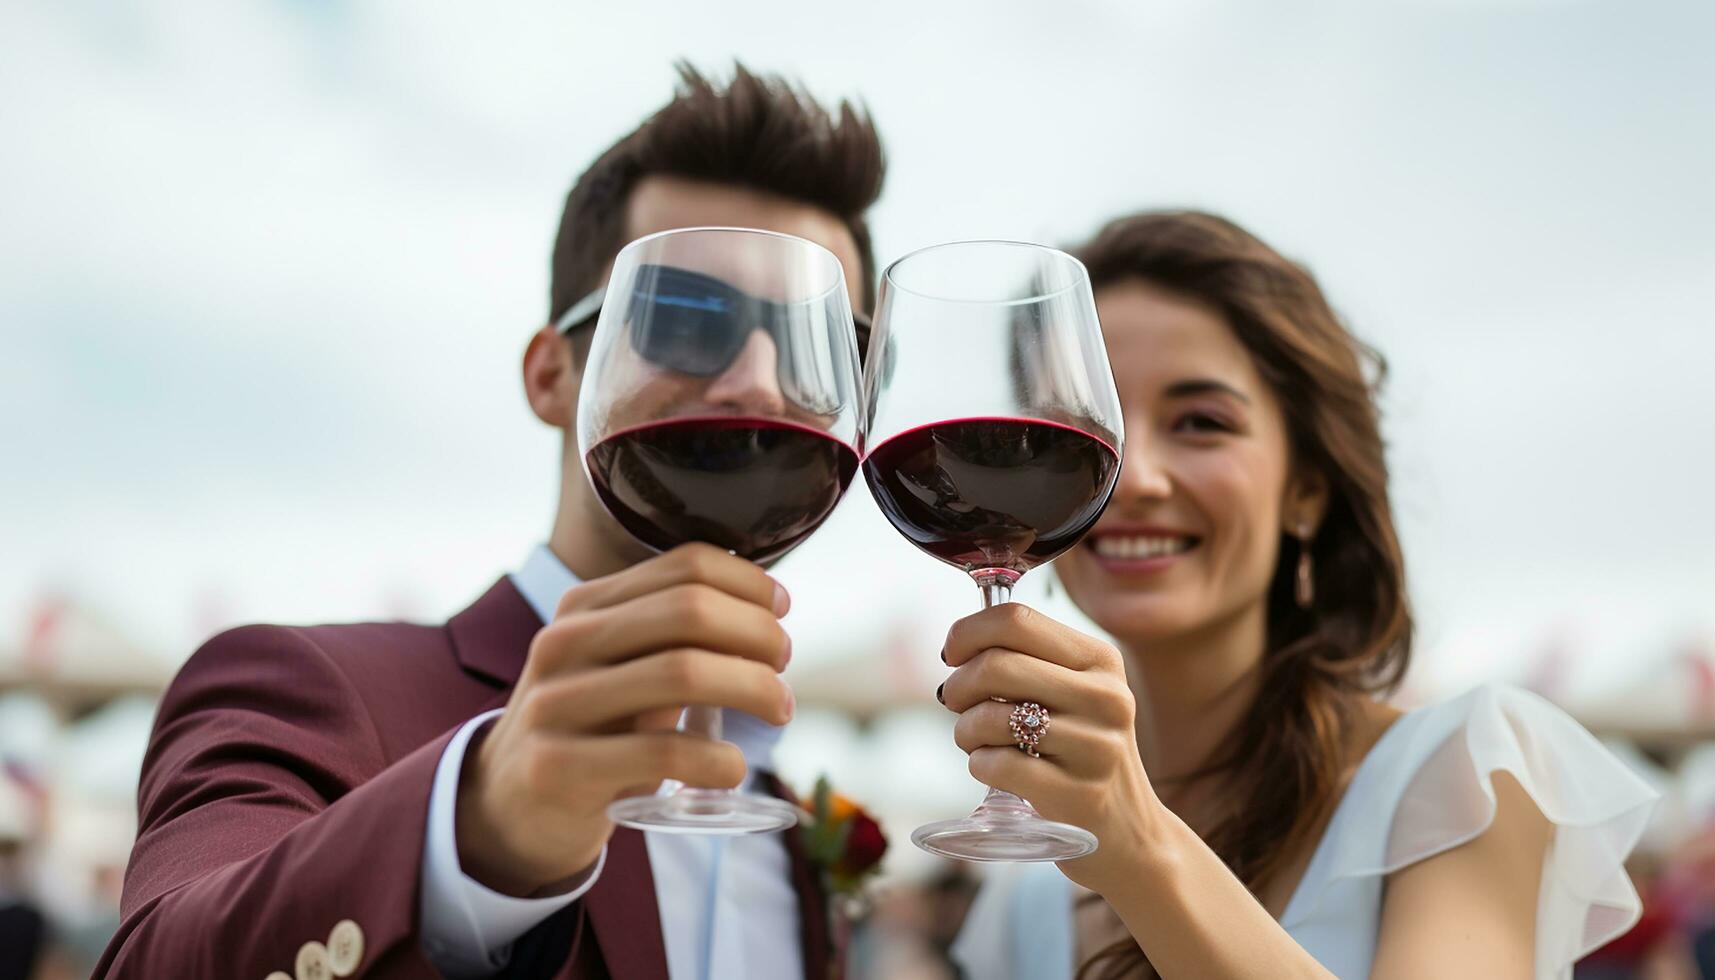 AI generated s enjoying a romantic outdoor wine celebration, generated by AI photo